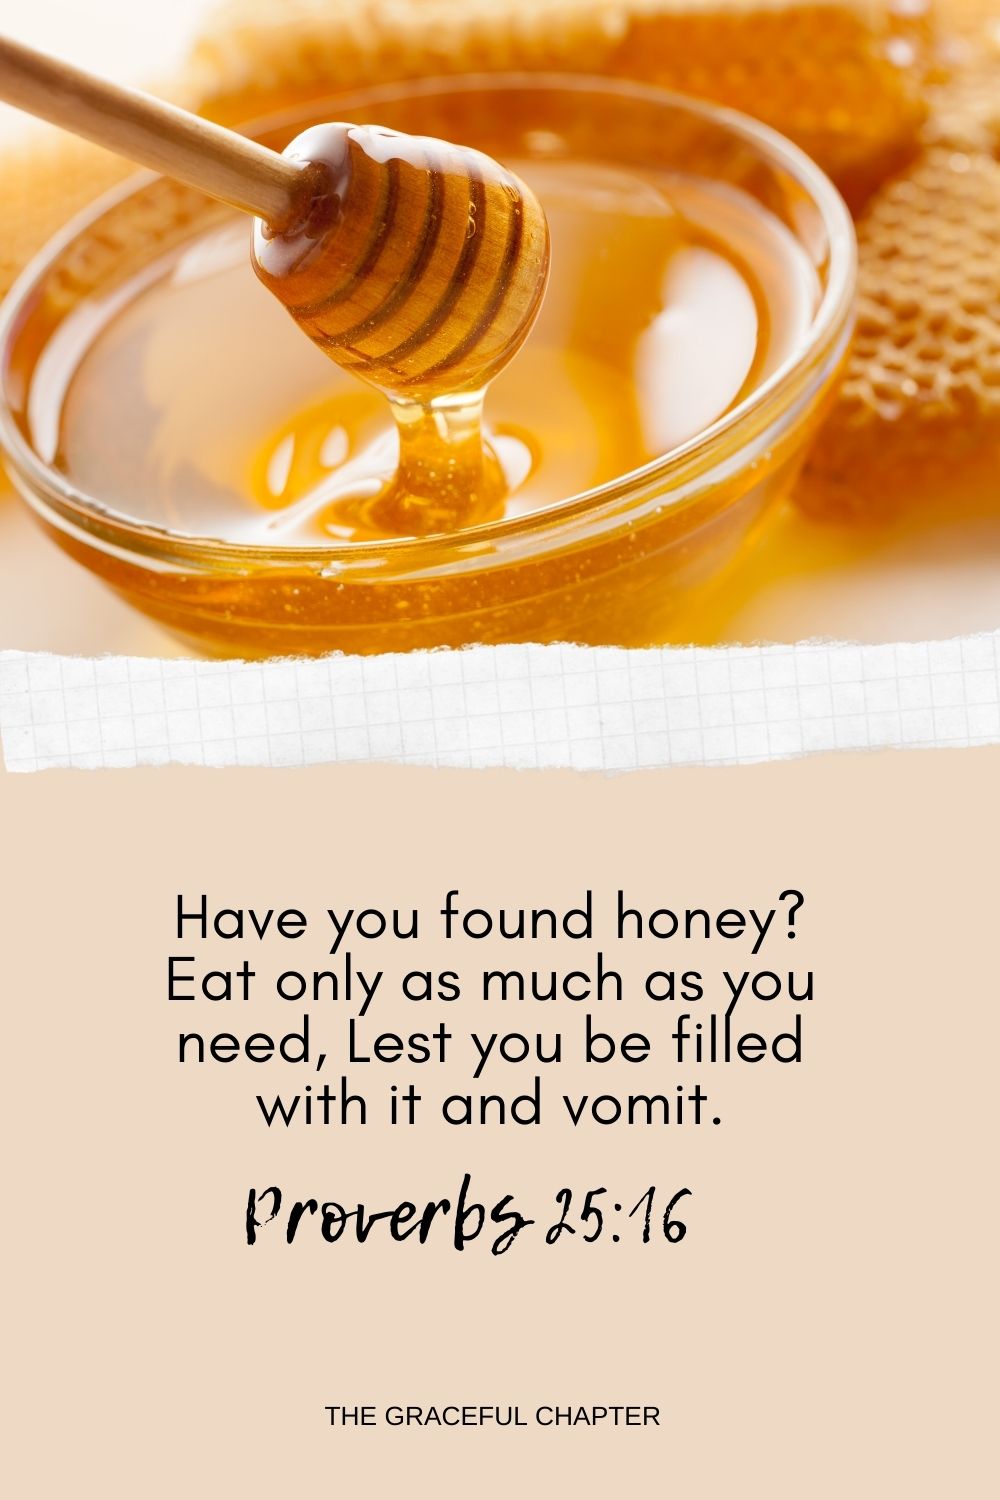 Have you found honey? Eat only as much as you need, Lest you be filled with it and vomit. Have you found honey? Eat only as much as you need, Lest you be filled with it and vomit. Proverbs 25:16